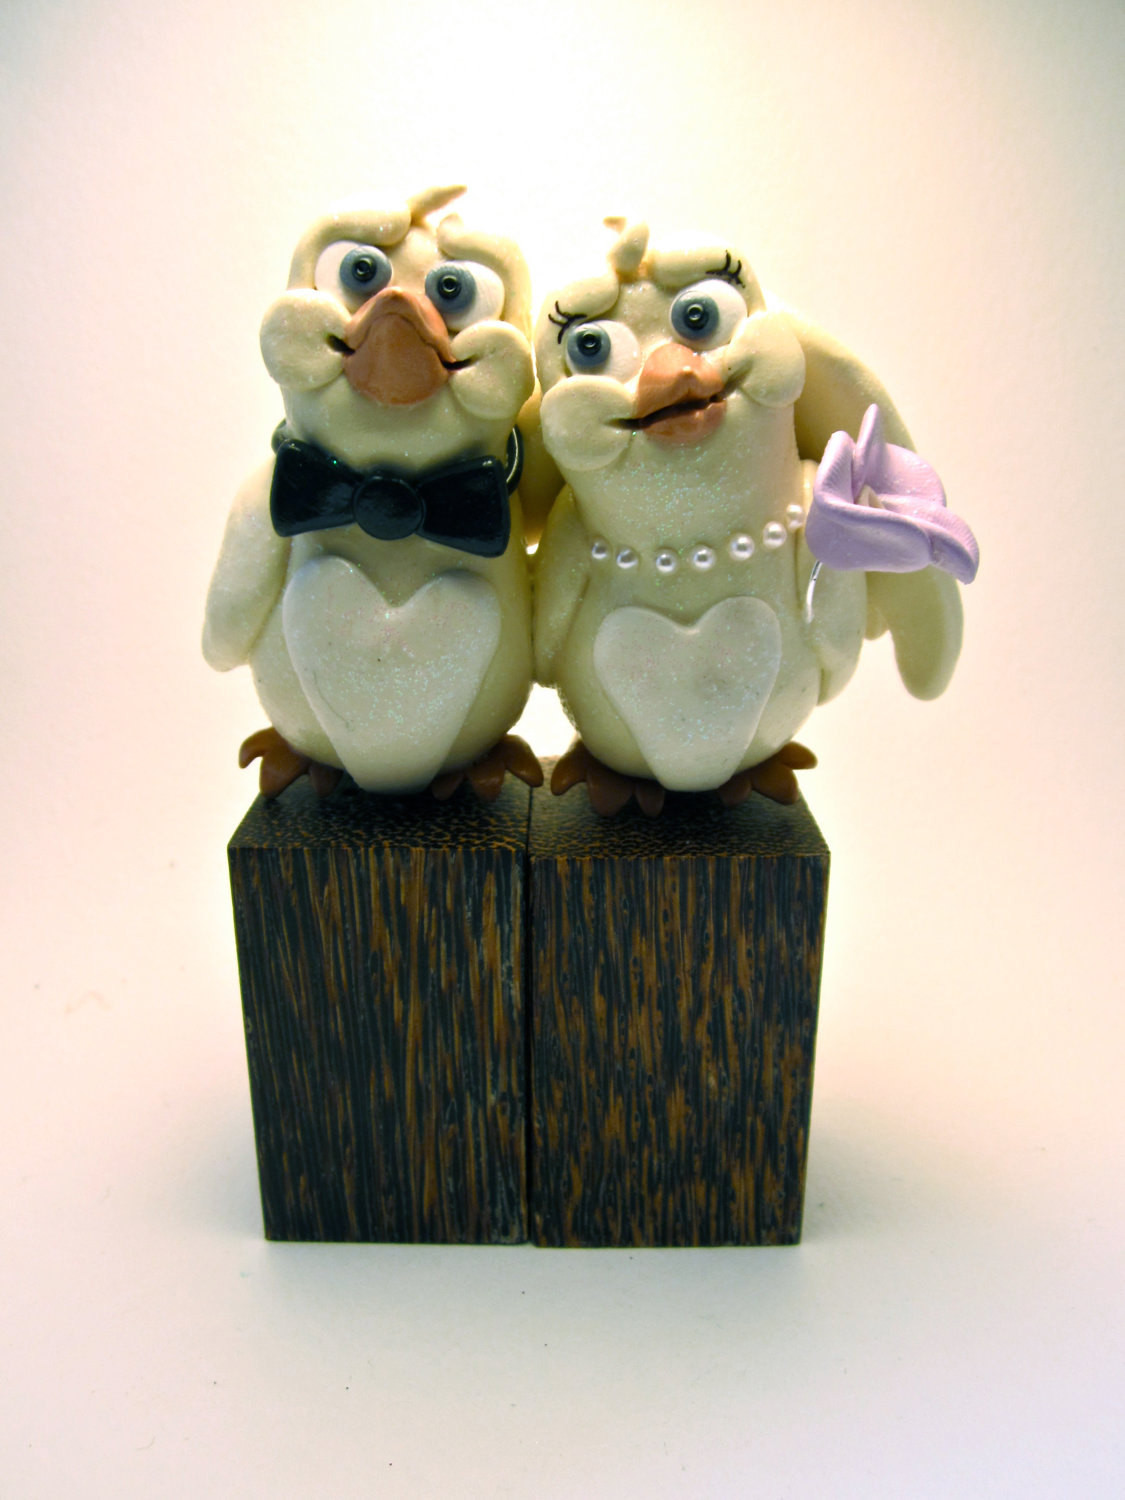 Animal Wedding Cake Toppers
 Canary Love Birds Custom Animal Wedding Cake Topper by Tobbers